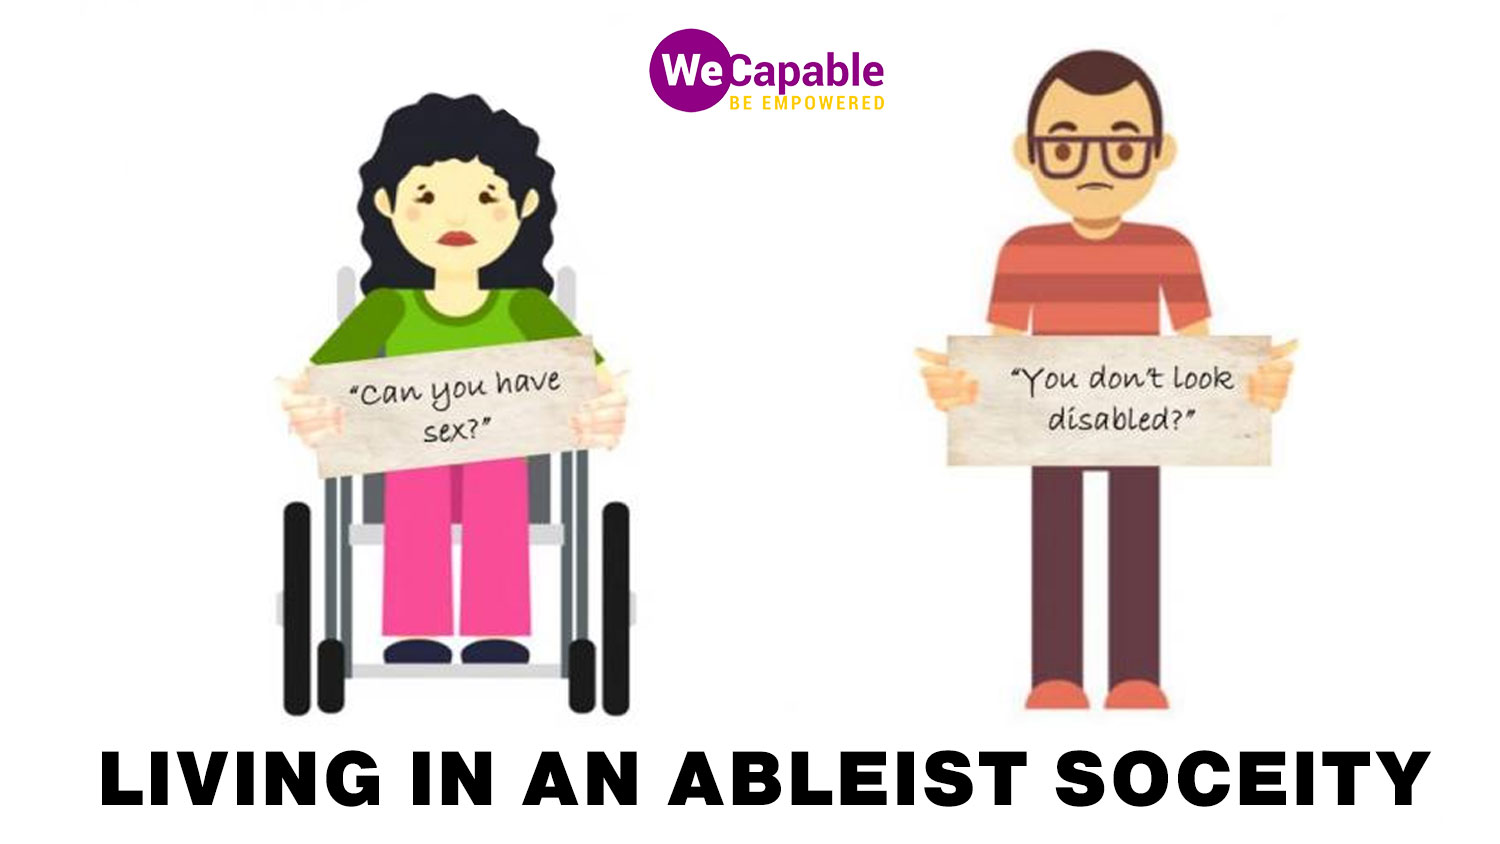 Examples of ableism. A clipart showing often asked questions by an ableist society